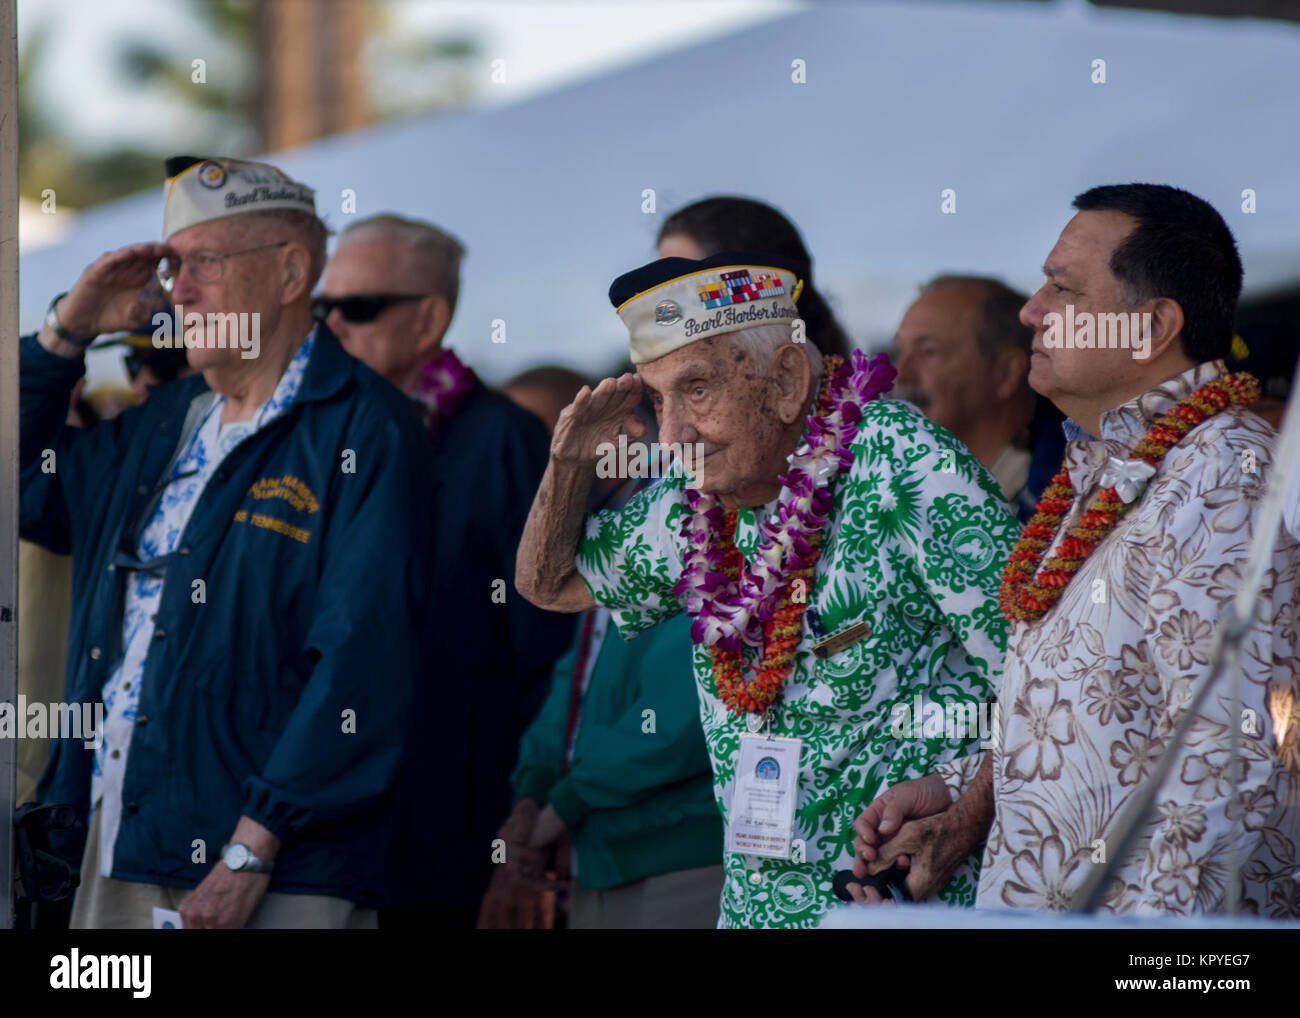 PEARL HARBOR (Dec. 7, 2017) Chief Storekeeper (ret.) Al Rodrigues renders honors during the presentation of colors at the 76th Anniversary of the attacks on Pearl Harbor and Oahu at Joint Base Pearl Harbor-Hickam. The 76th commemoration, co-hosted by the U.S. Military, the National Park Service and the State of Hawaii, provided veterans, family members, service members and the community a chance to honor the sacrifices made by those who were present Dec. 7, 1941, as well as throughout the Pacific theater. Since the attacks, the U.S. and Japan have endured more than 70 years of continued peace, Stock Photo